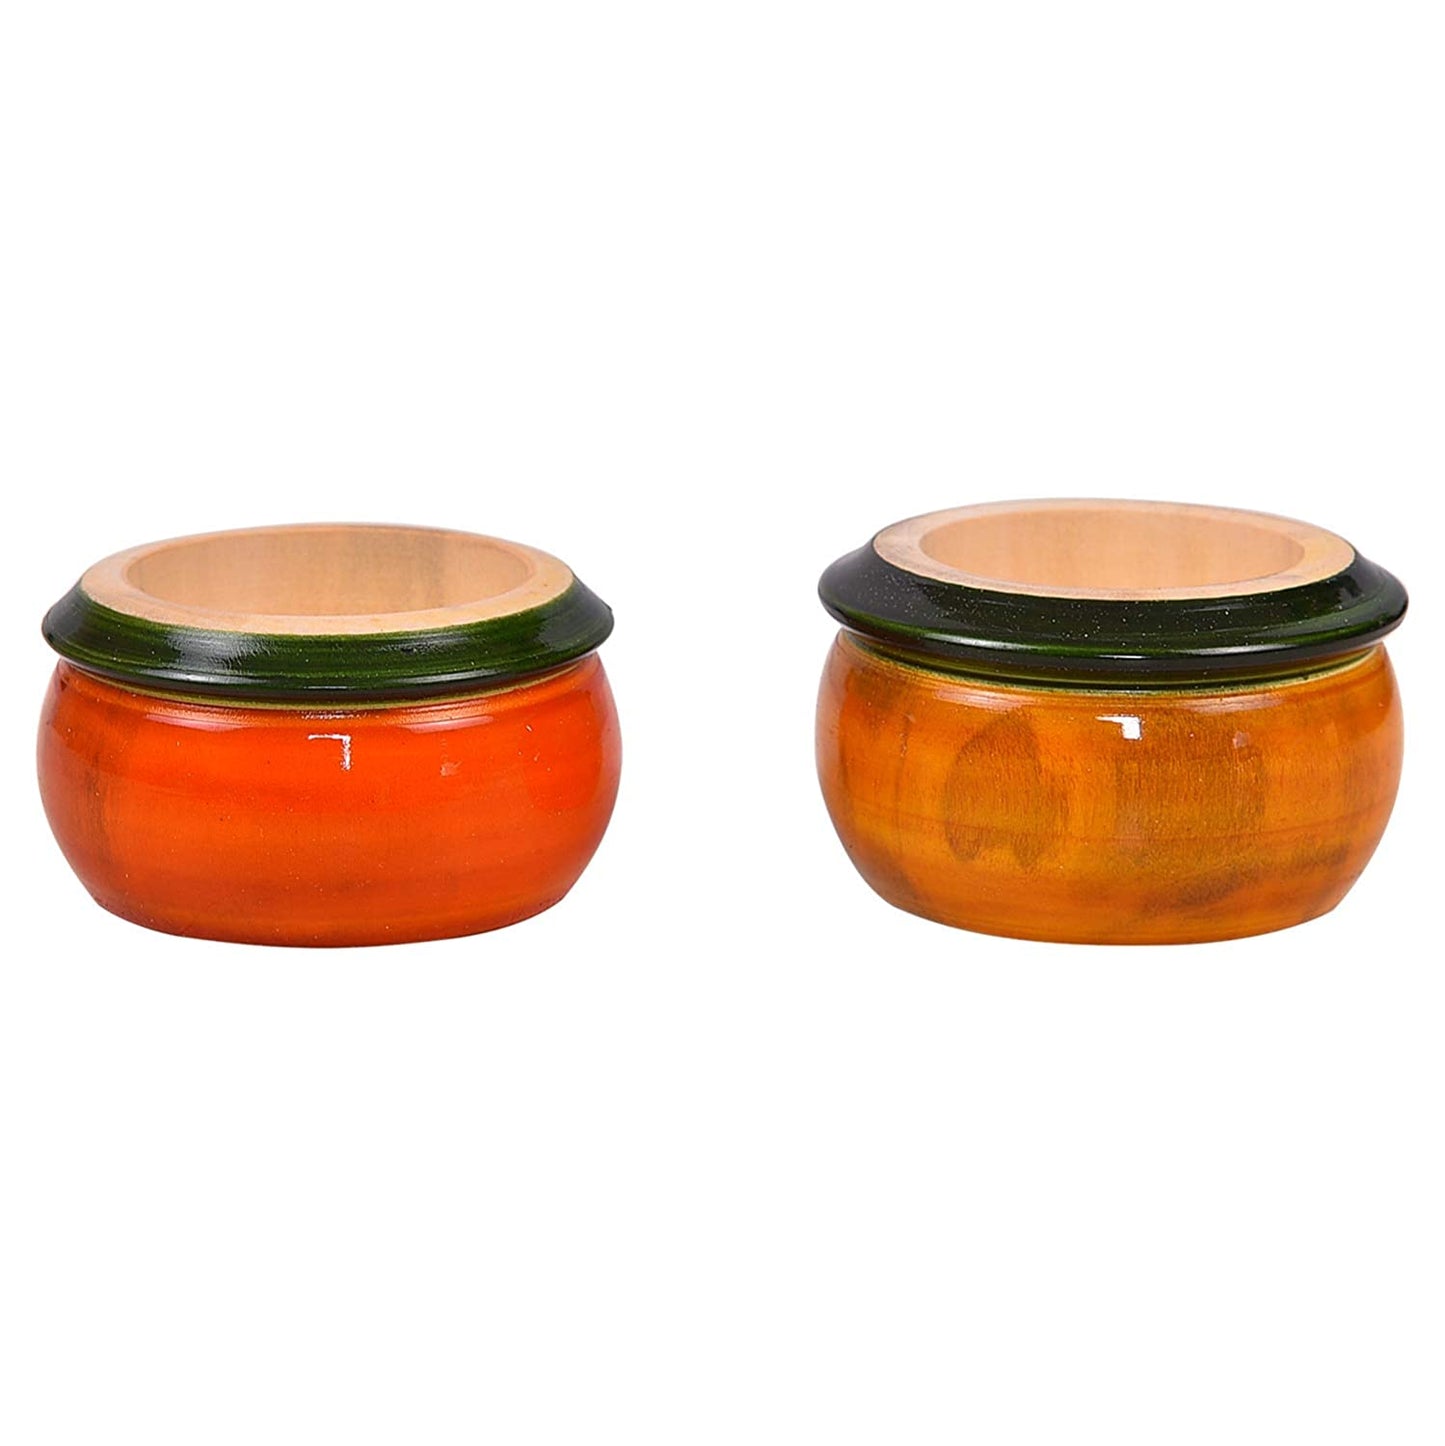 Candle Holders Tea Light Candle Holders Set Of 2 -Multi Color (Made In India)